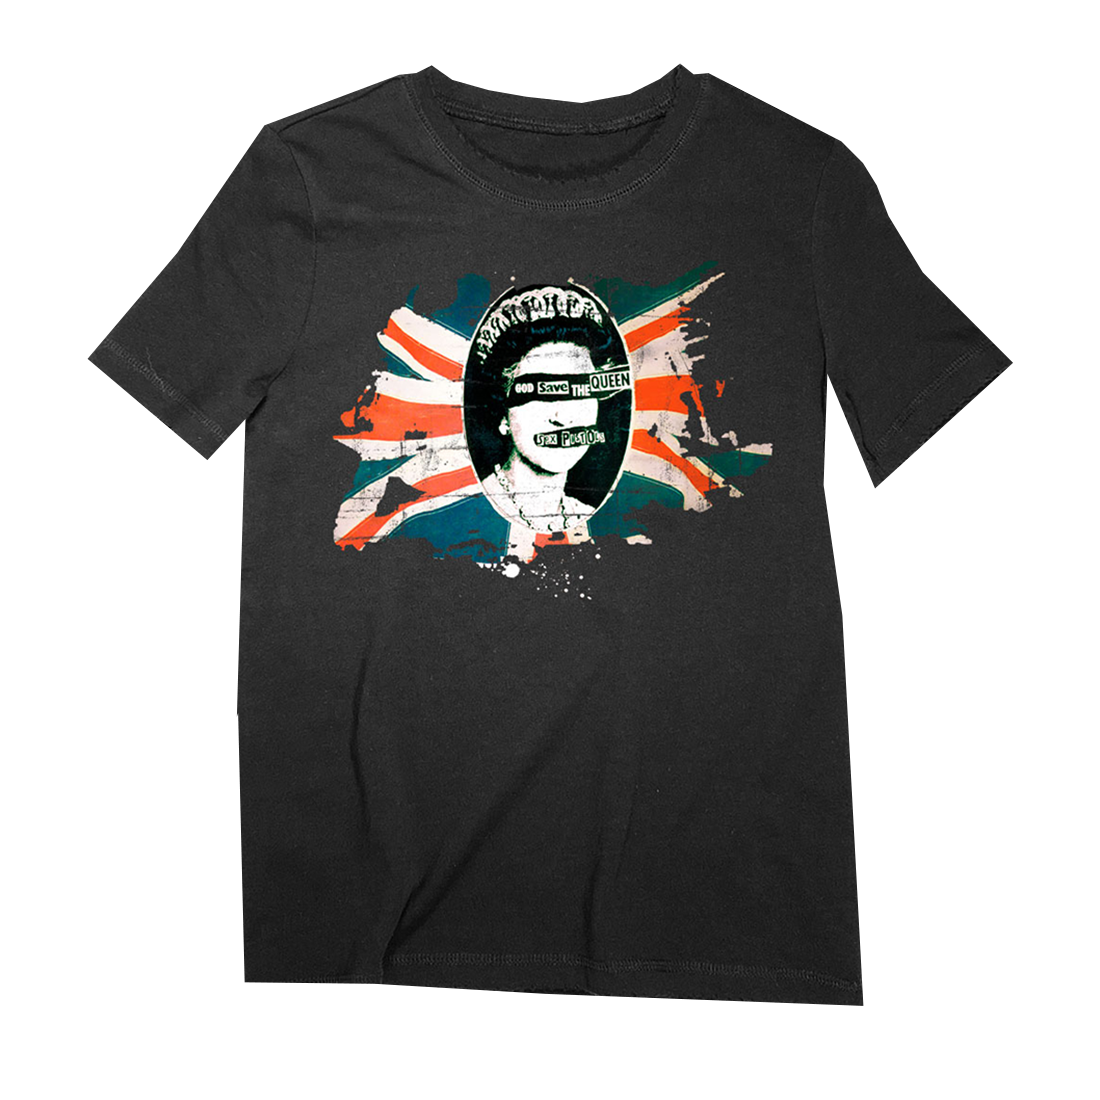 Sex Pistols - God Save The Queen T-Shirt